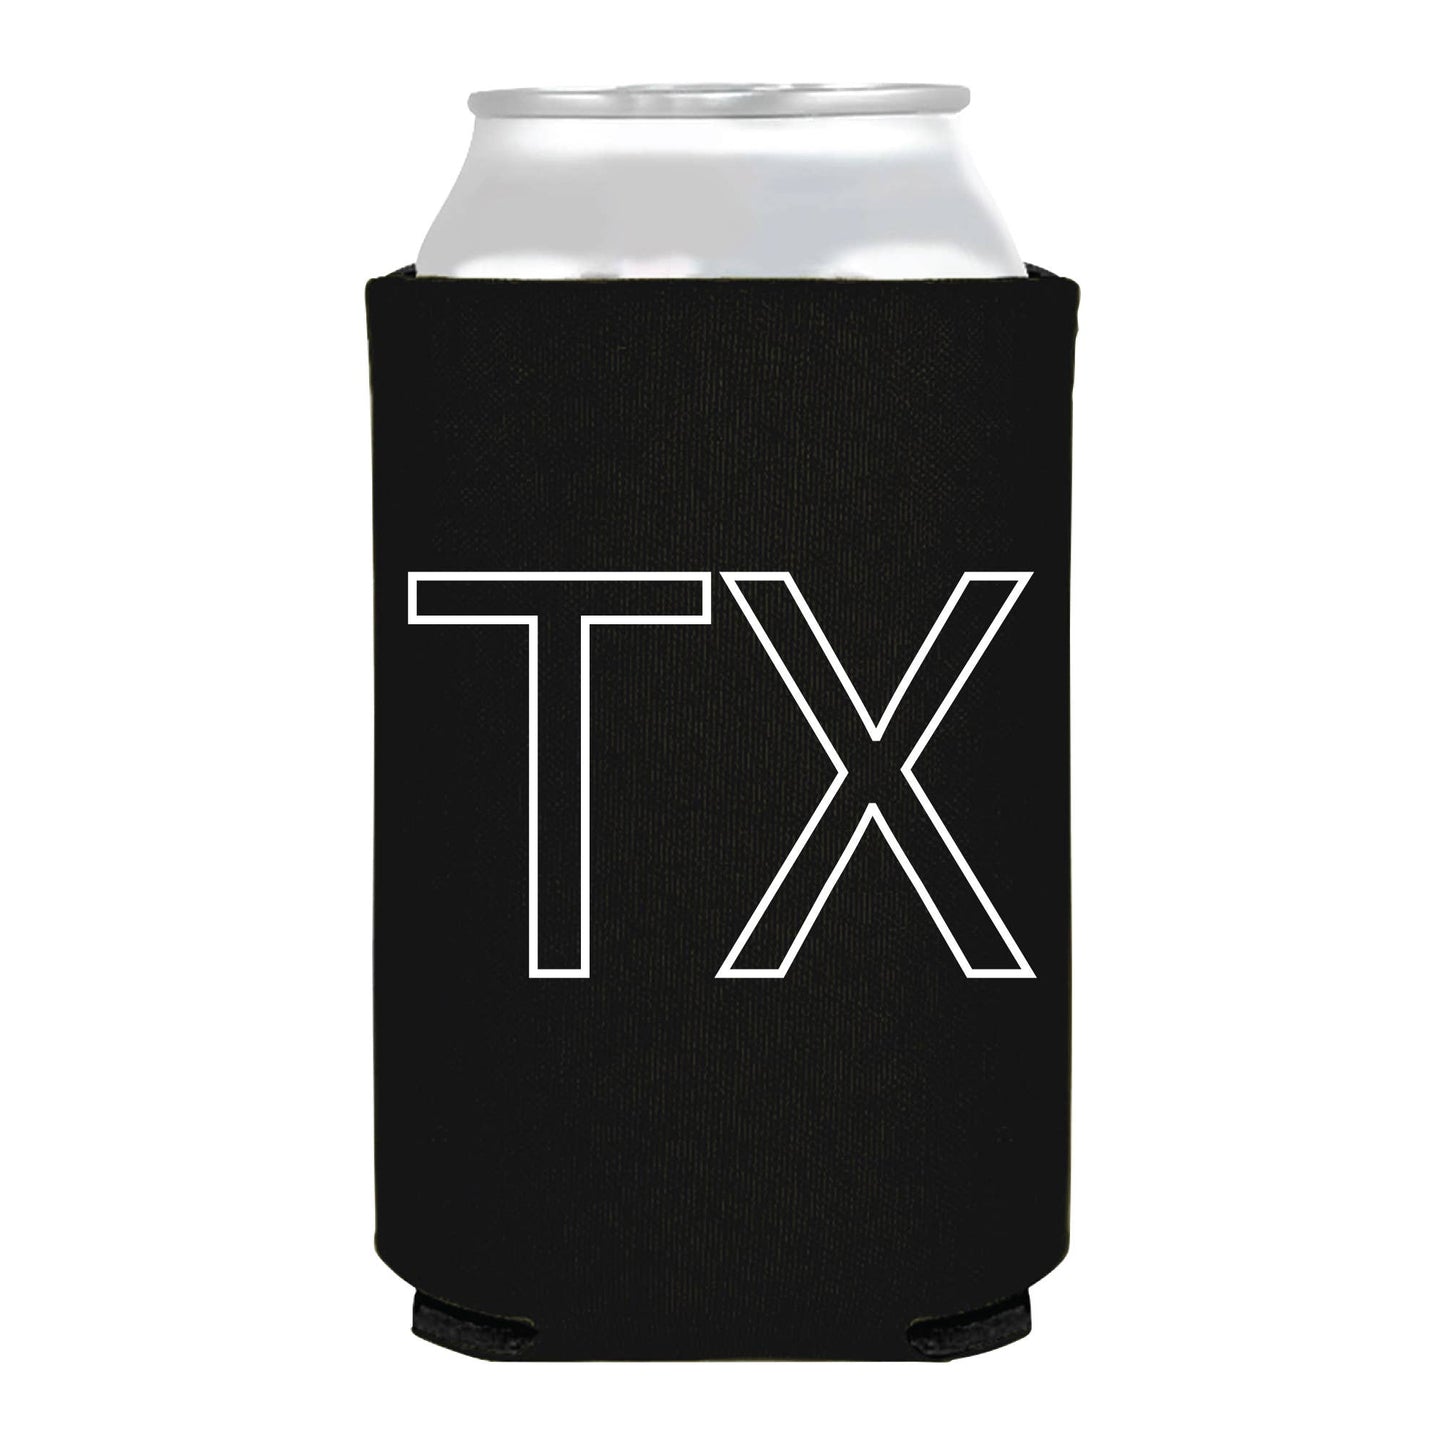 TX Texas State Pride Can Cooler- Texas